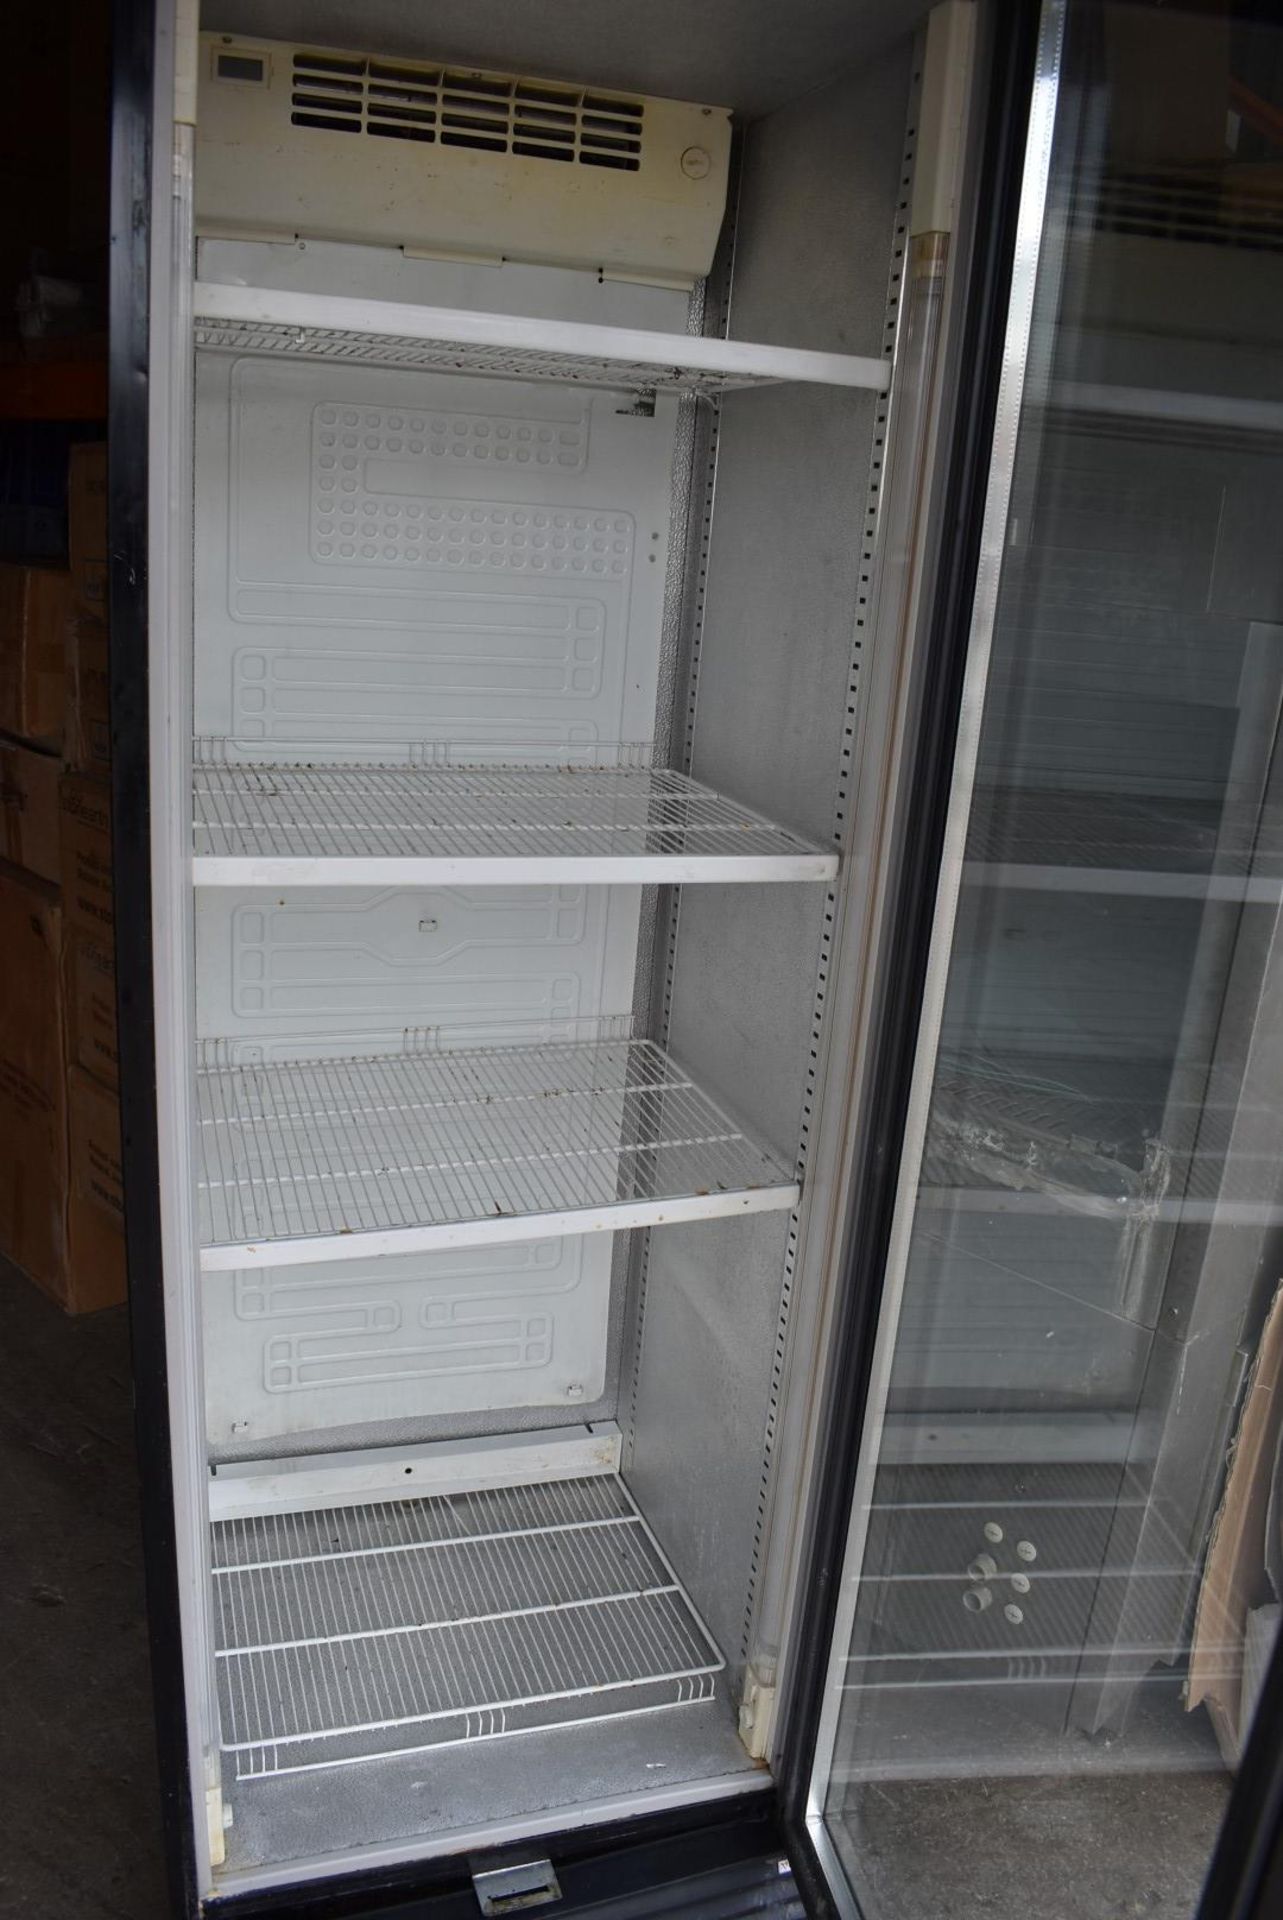 1 x Caravell Upright Single Door Drinks Display Chiller - Recently Removed From a Restaurant - Image 6 of 6